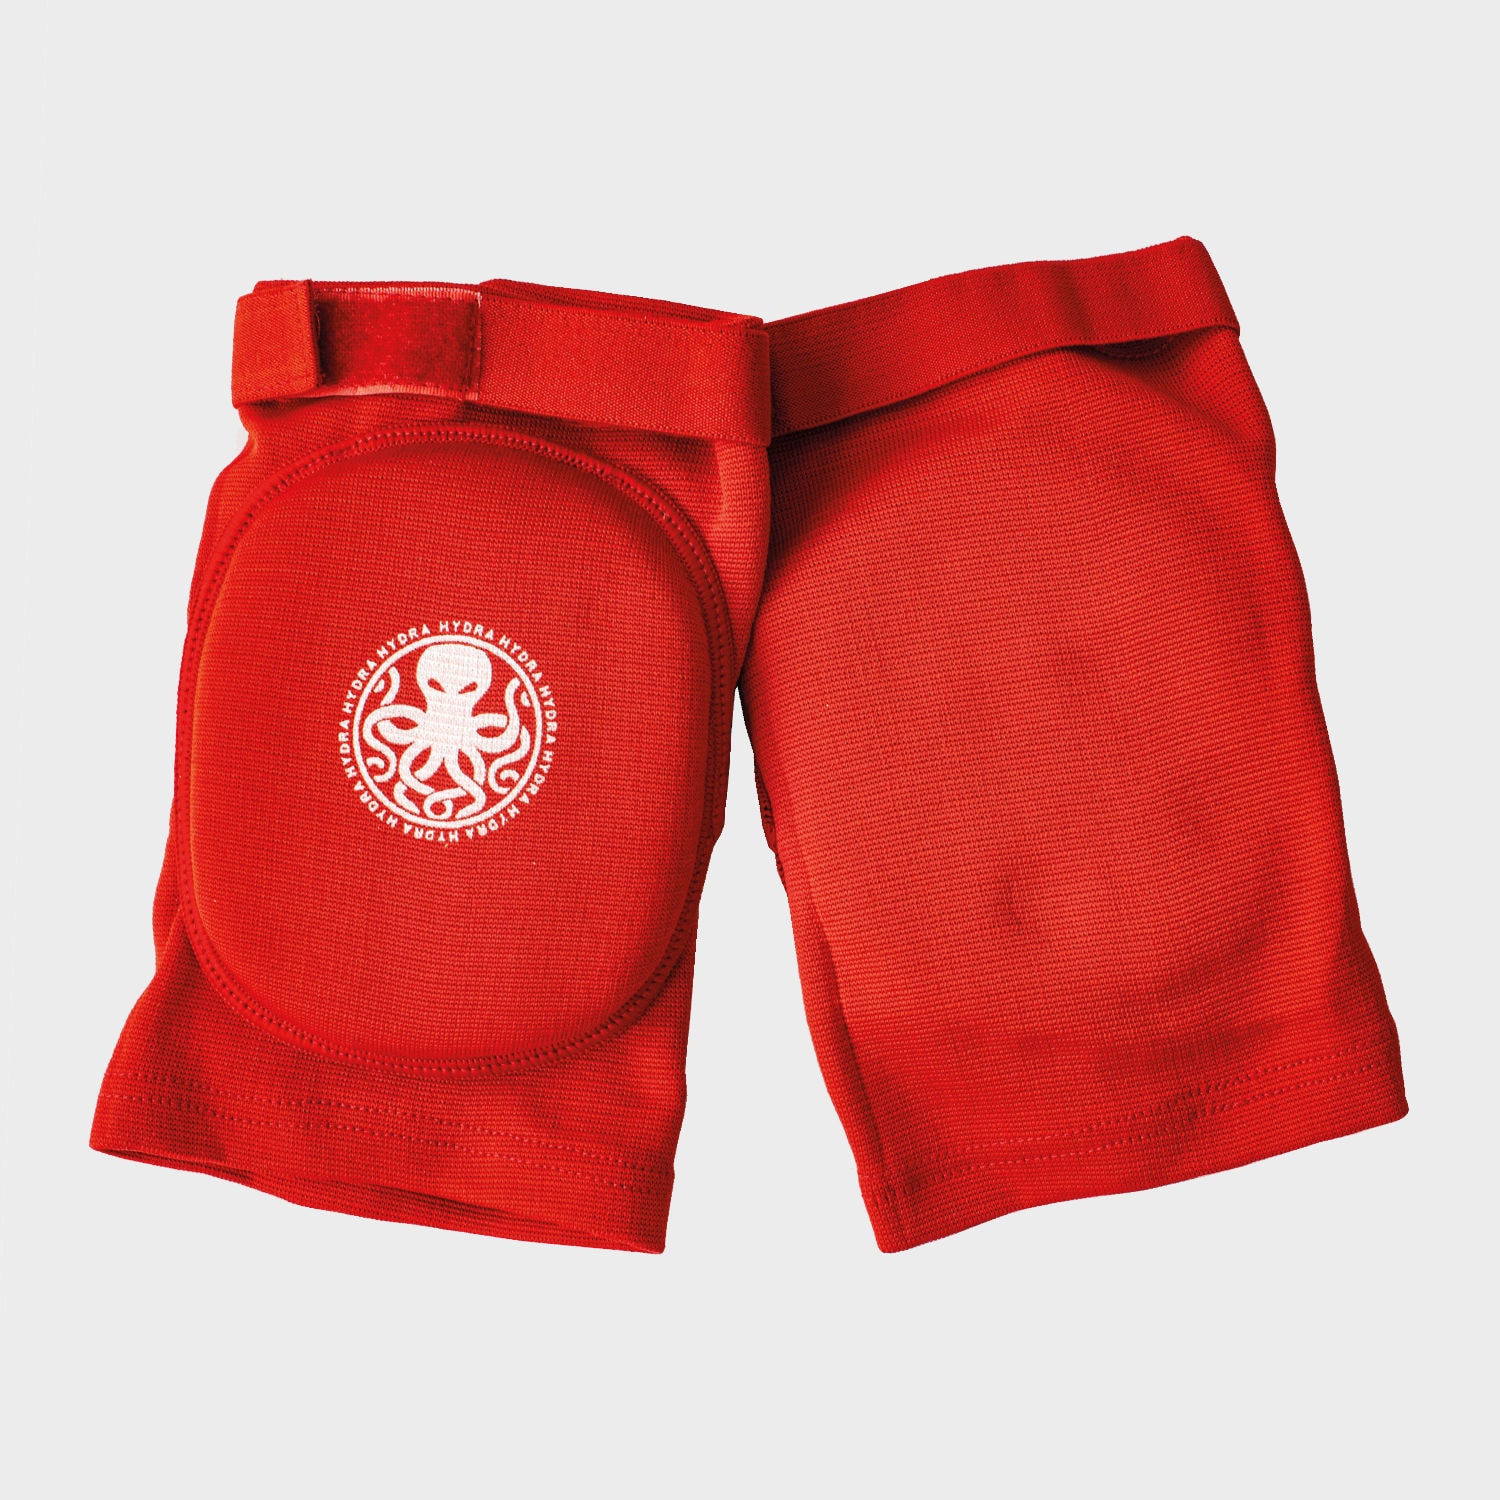 Hydra Red Competition Elbow Pads - Hydra